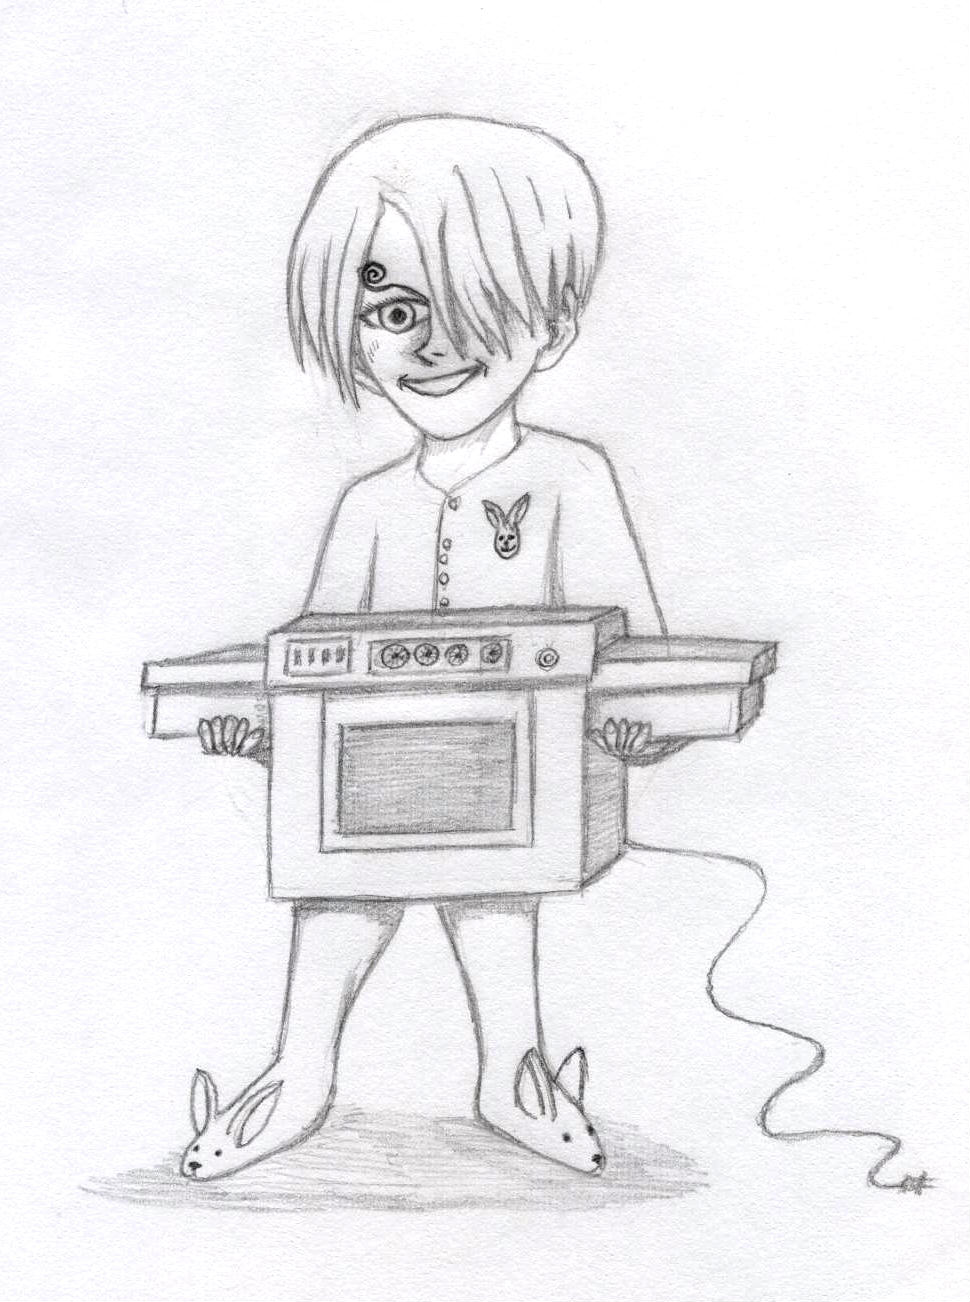 Sanji's first oven by Ran_The_Hyena